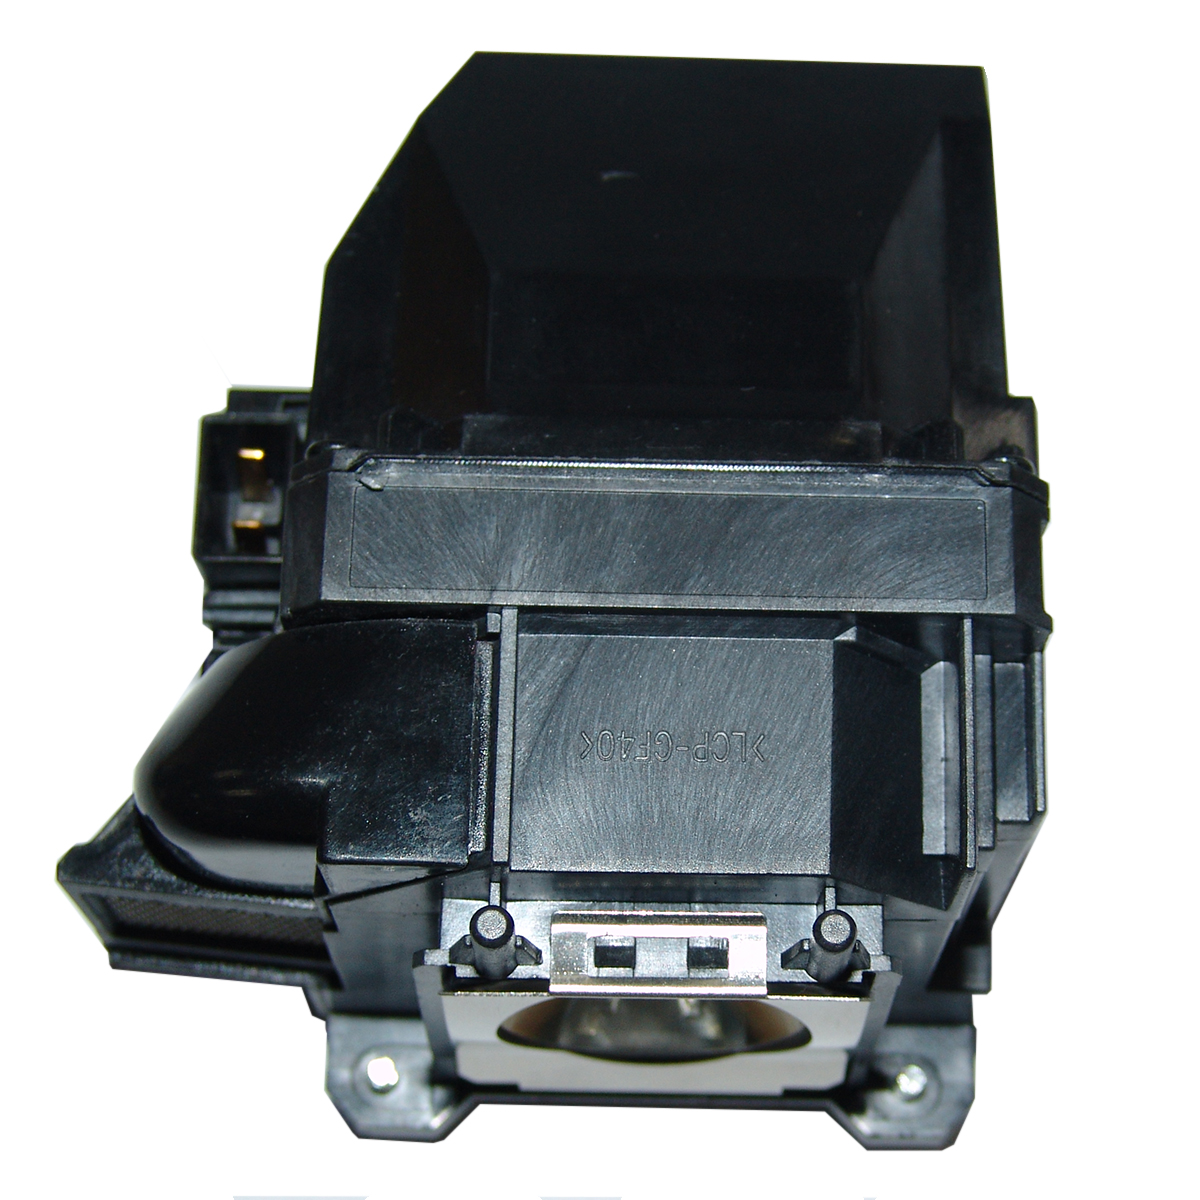 V13H010L78 Replacement Lamp & Housing for Epson Projectors - image 4 of 5